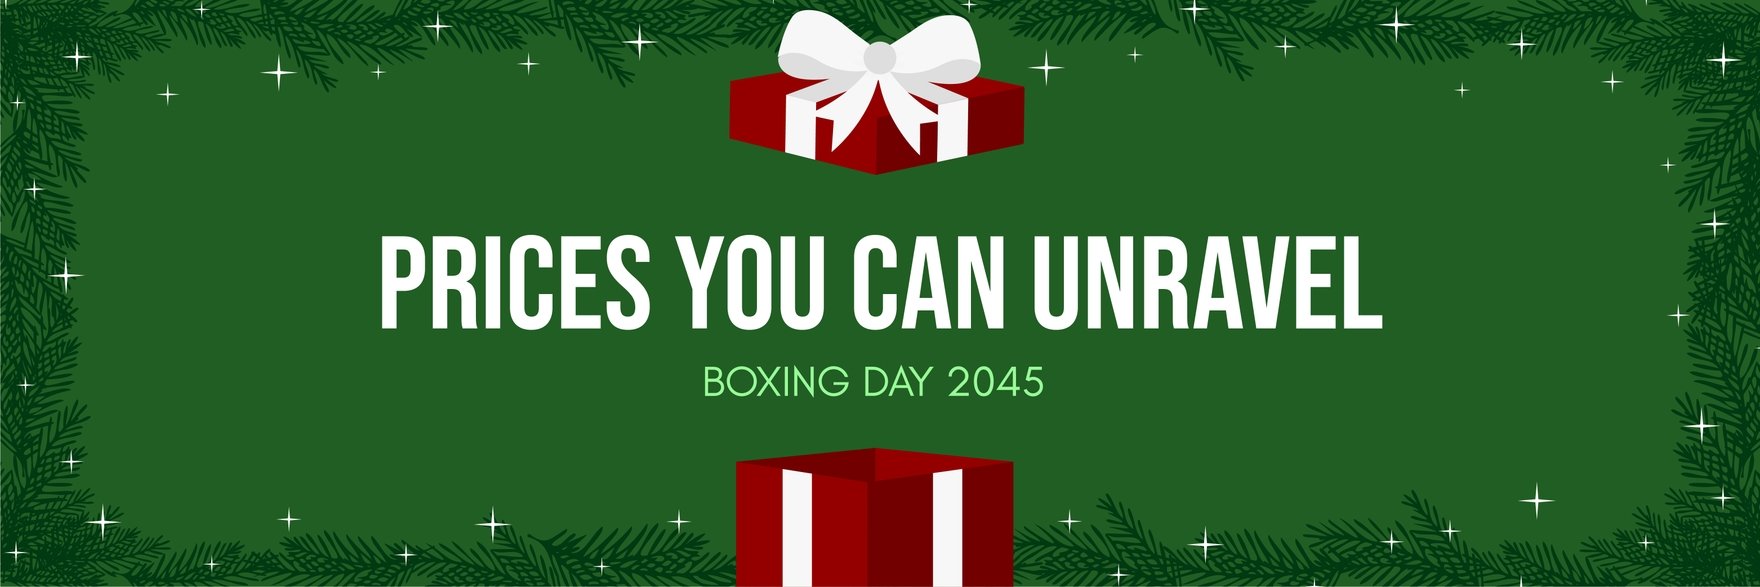 Boxing Day Twitter Banner